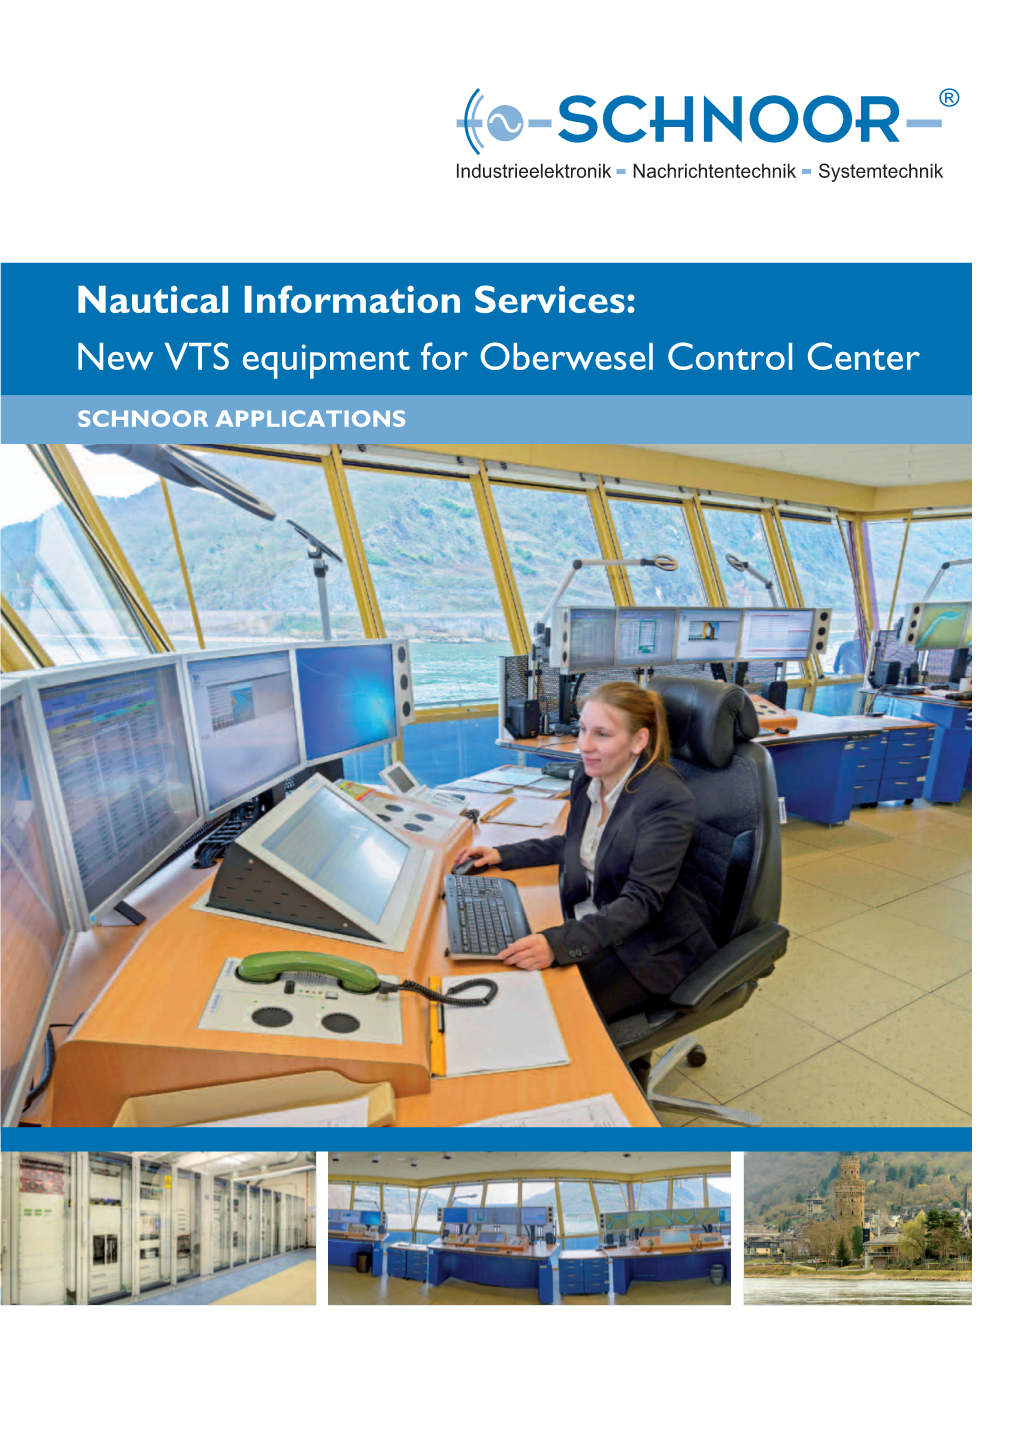 New VTS Equipment for Oberwesel Control Center